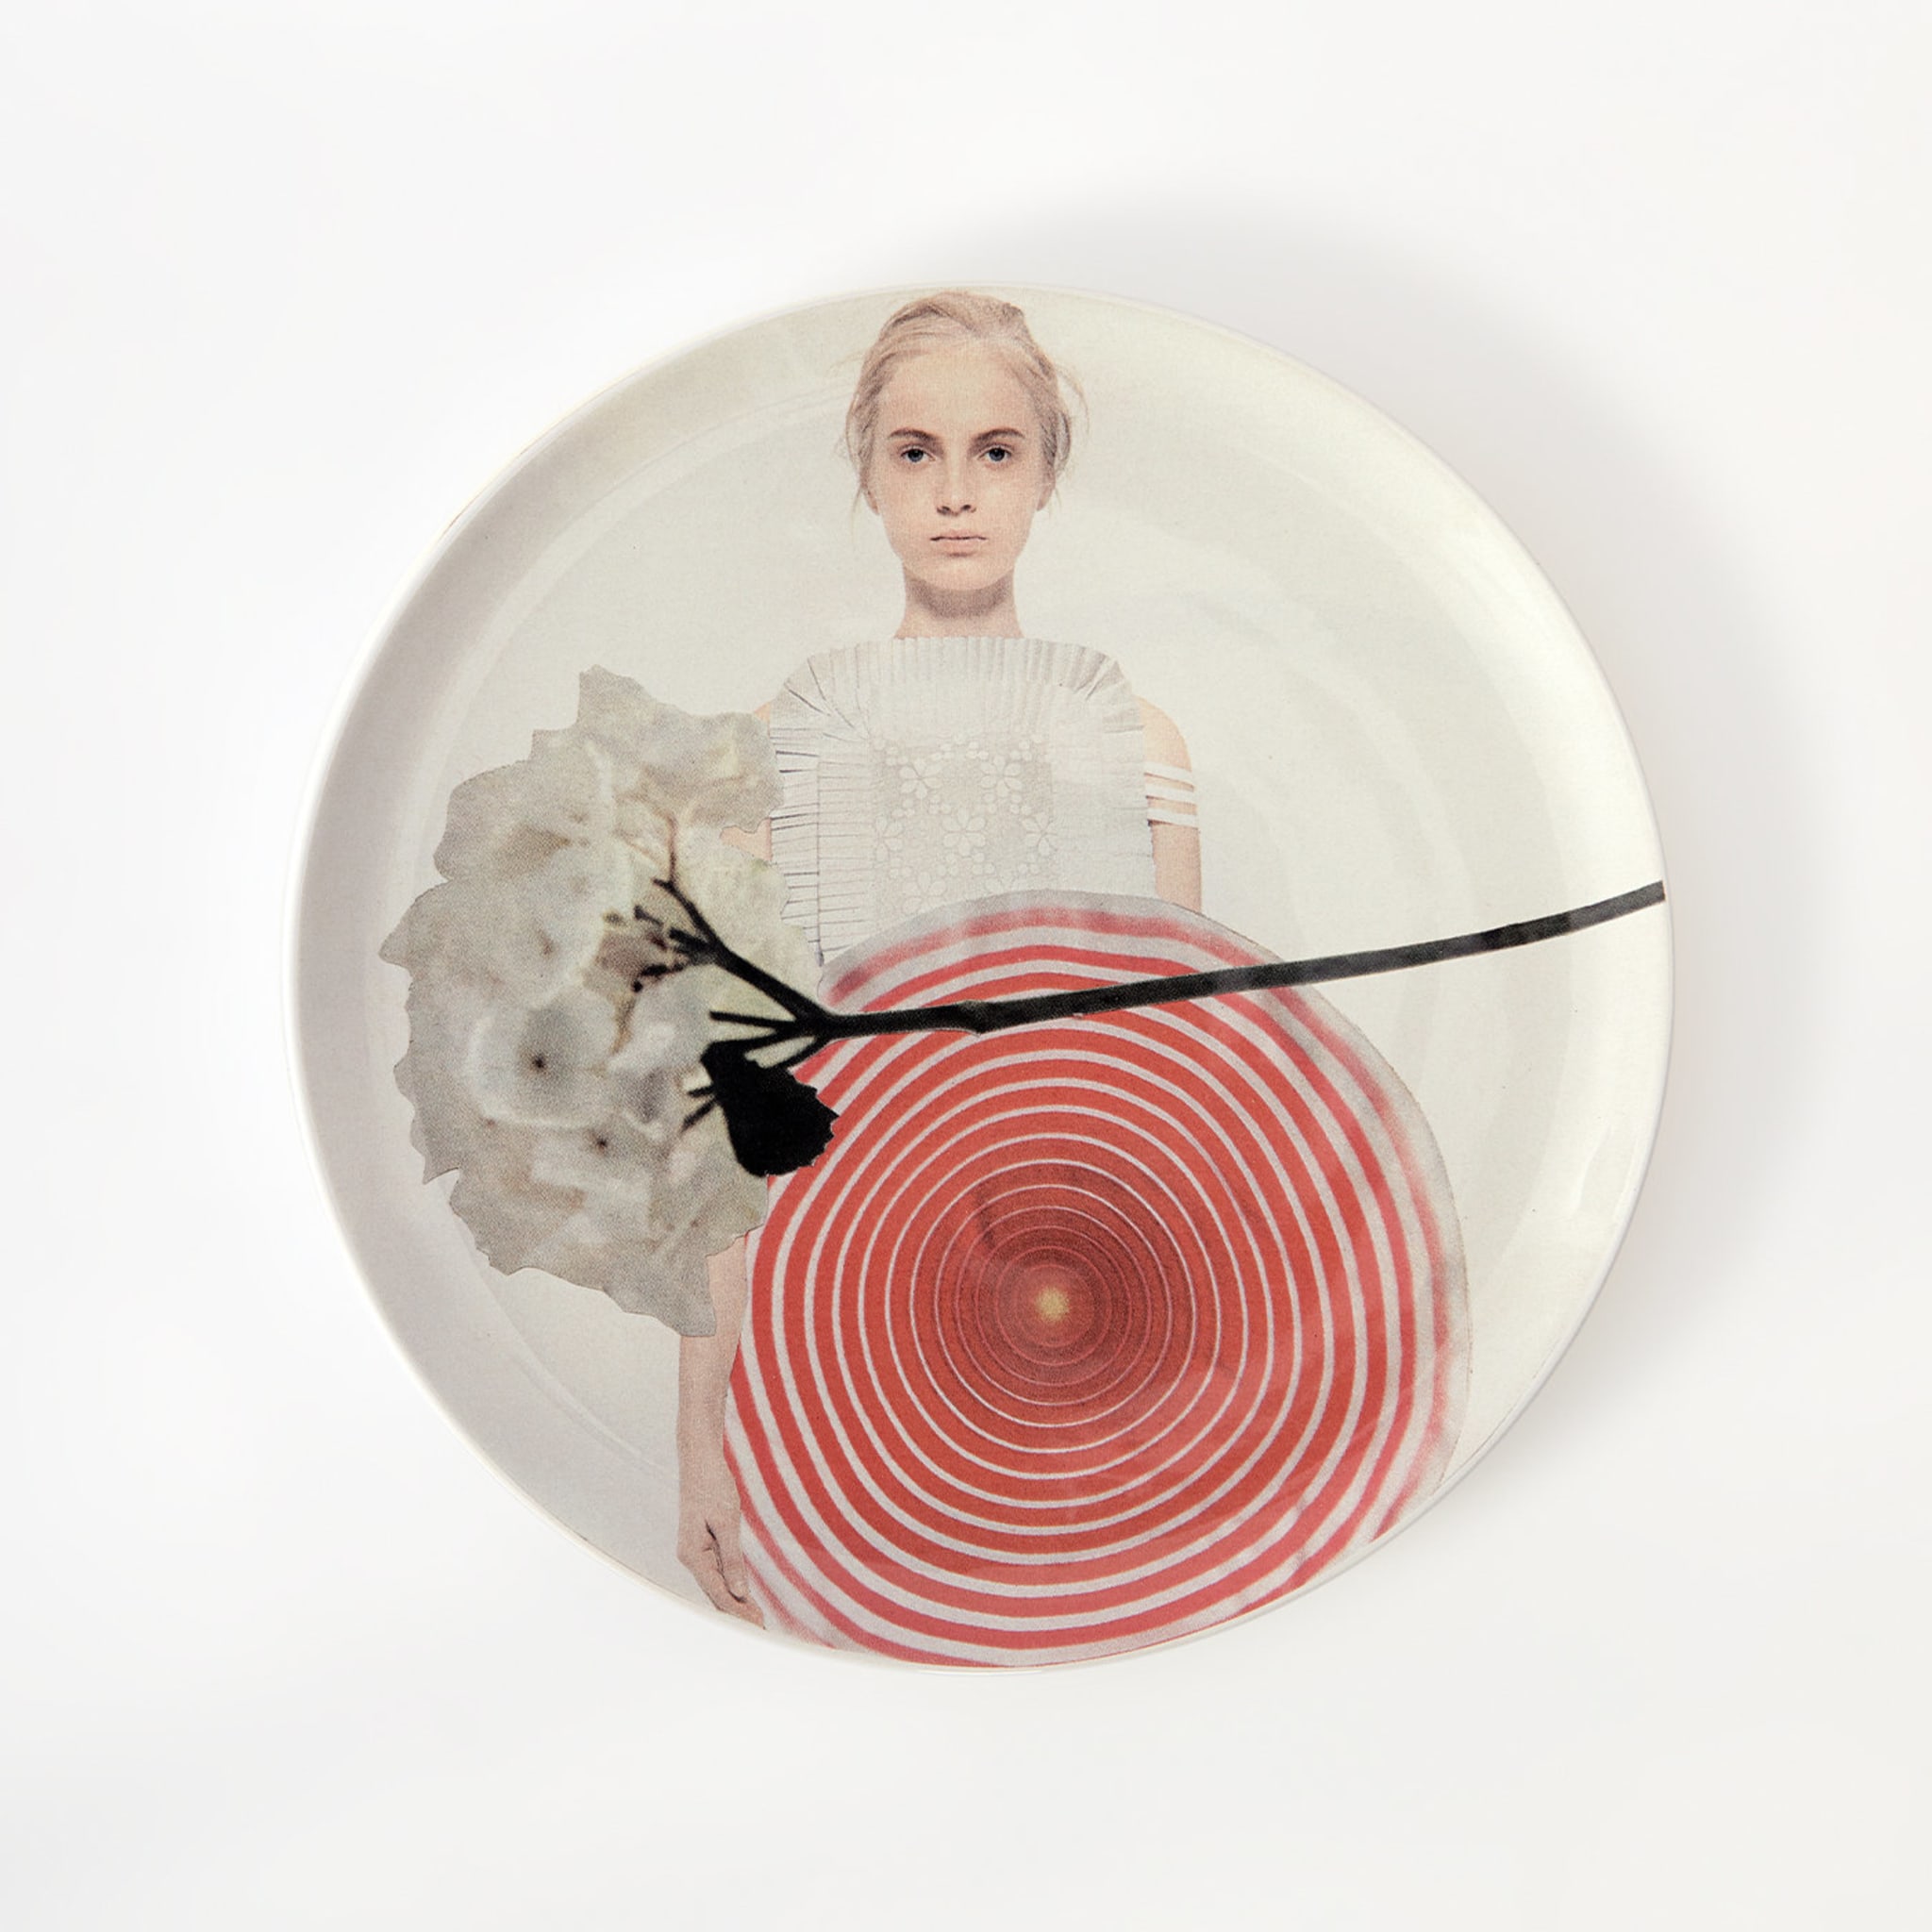 Oh Women! Decorative Plate #1 Limited Edition - Alternative view 2